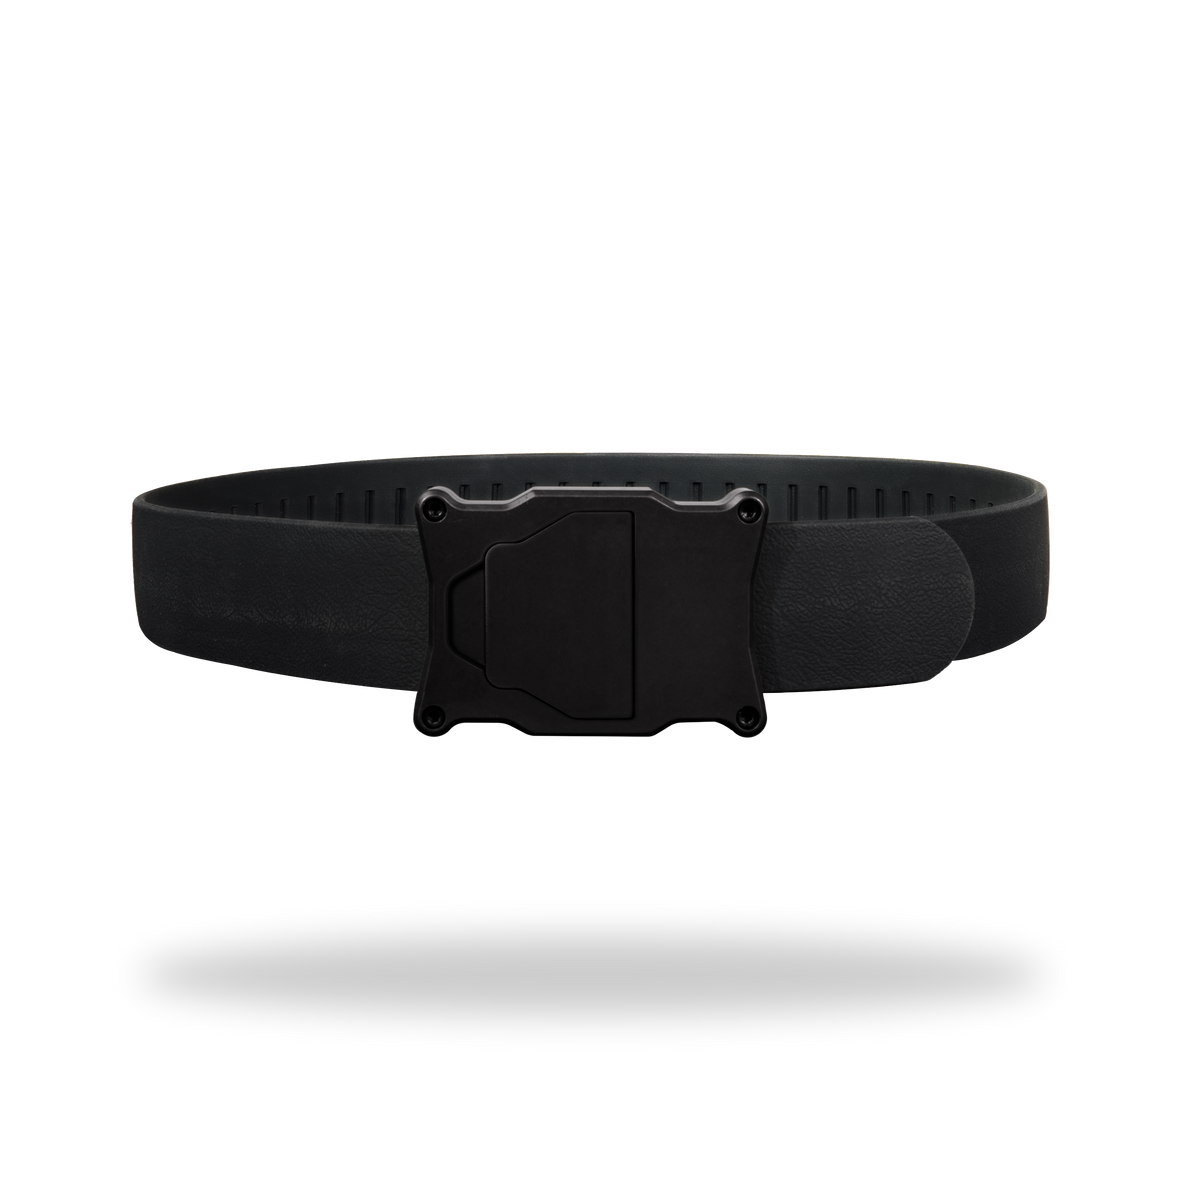 The Apogee Belt - Your Everyday Carry Belt